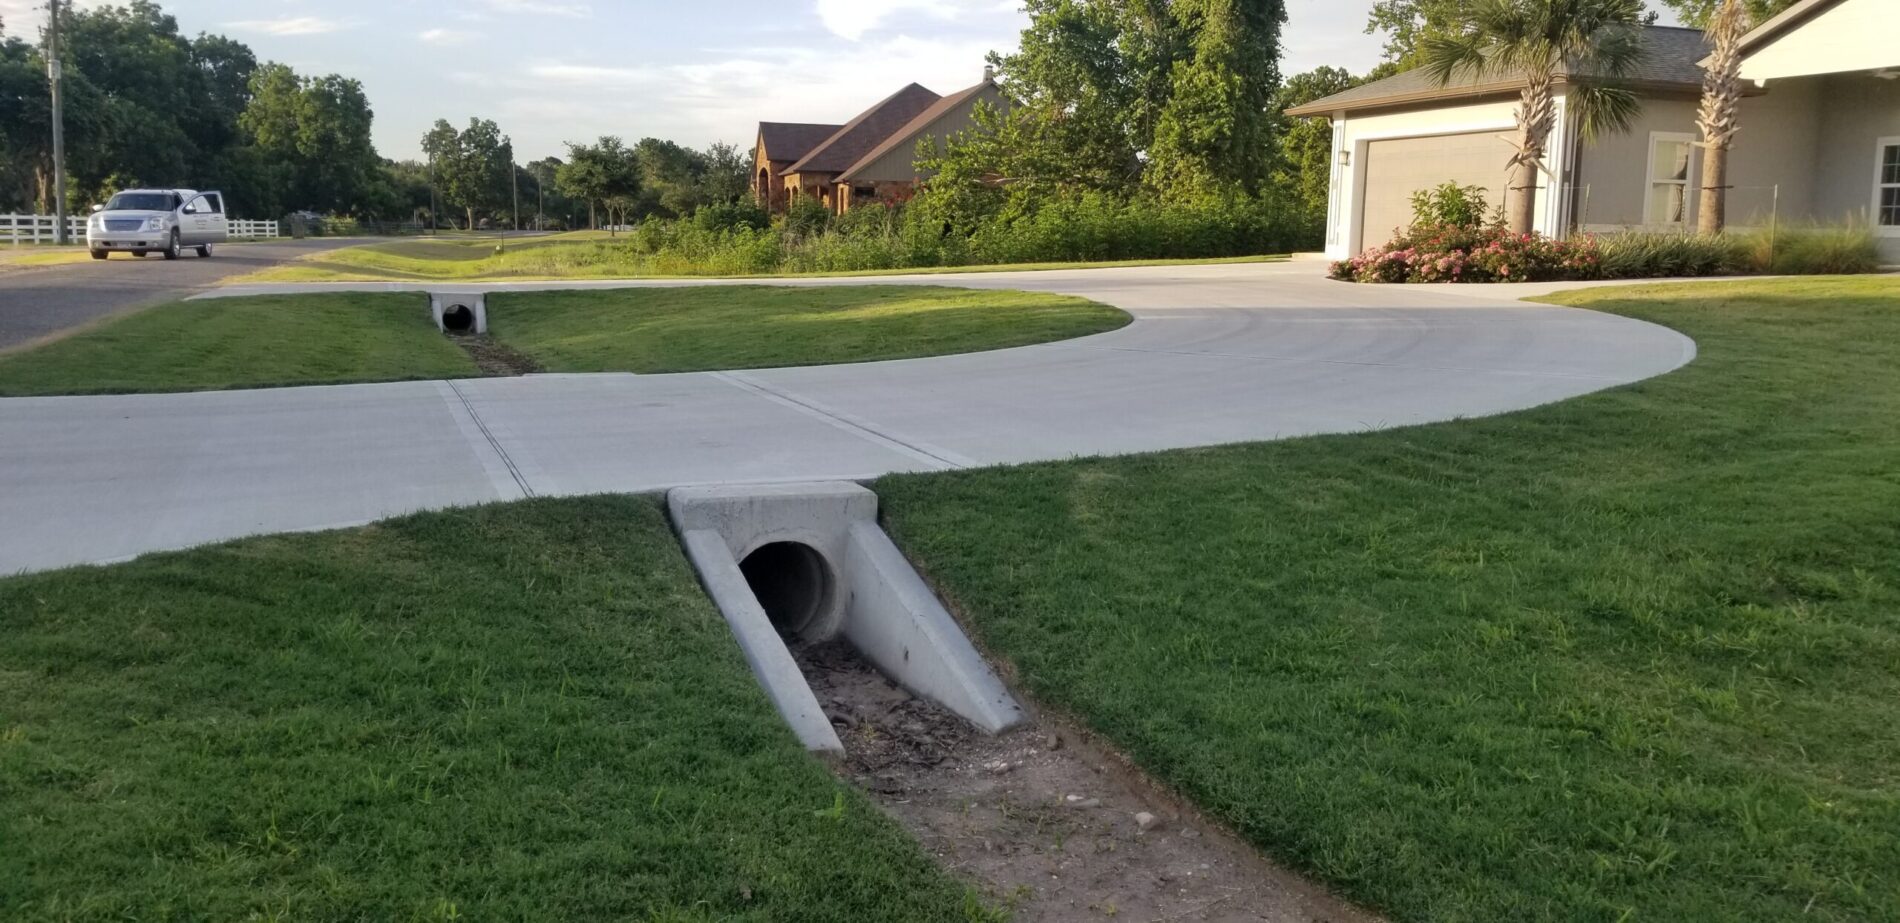 Concrete drain pipe under a residential driveway